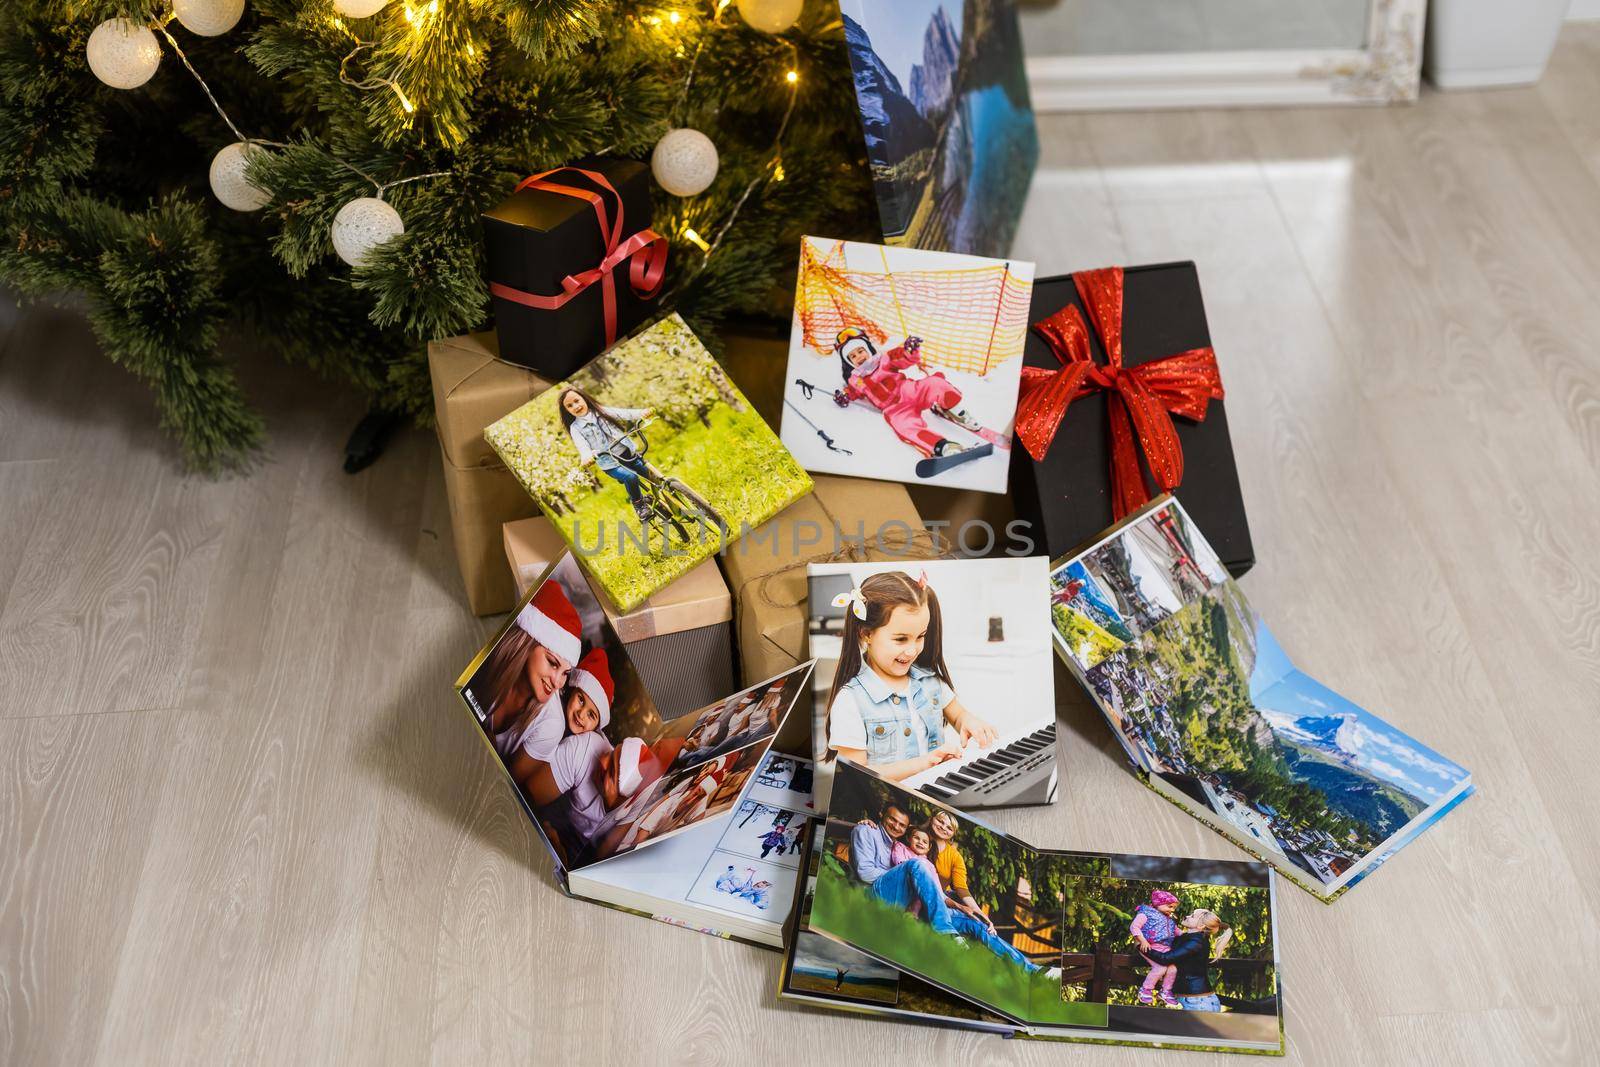 photobooks near the New Year tree, colored as a gift for the holiday. by Andelov13